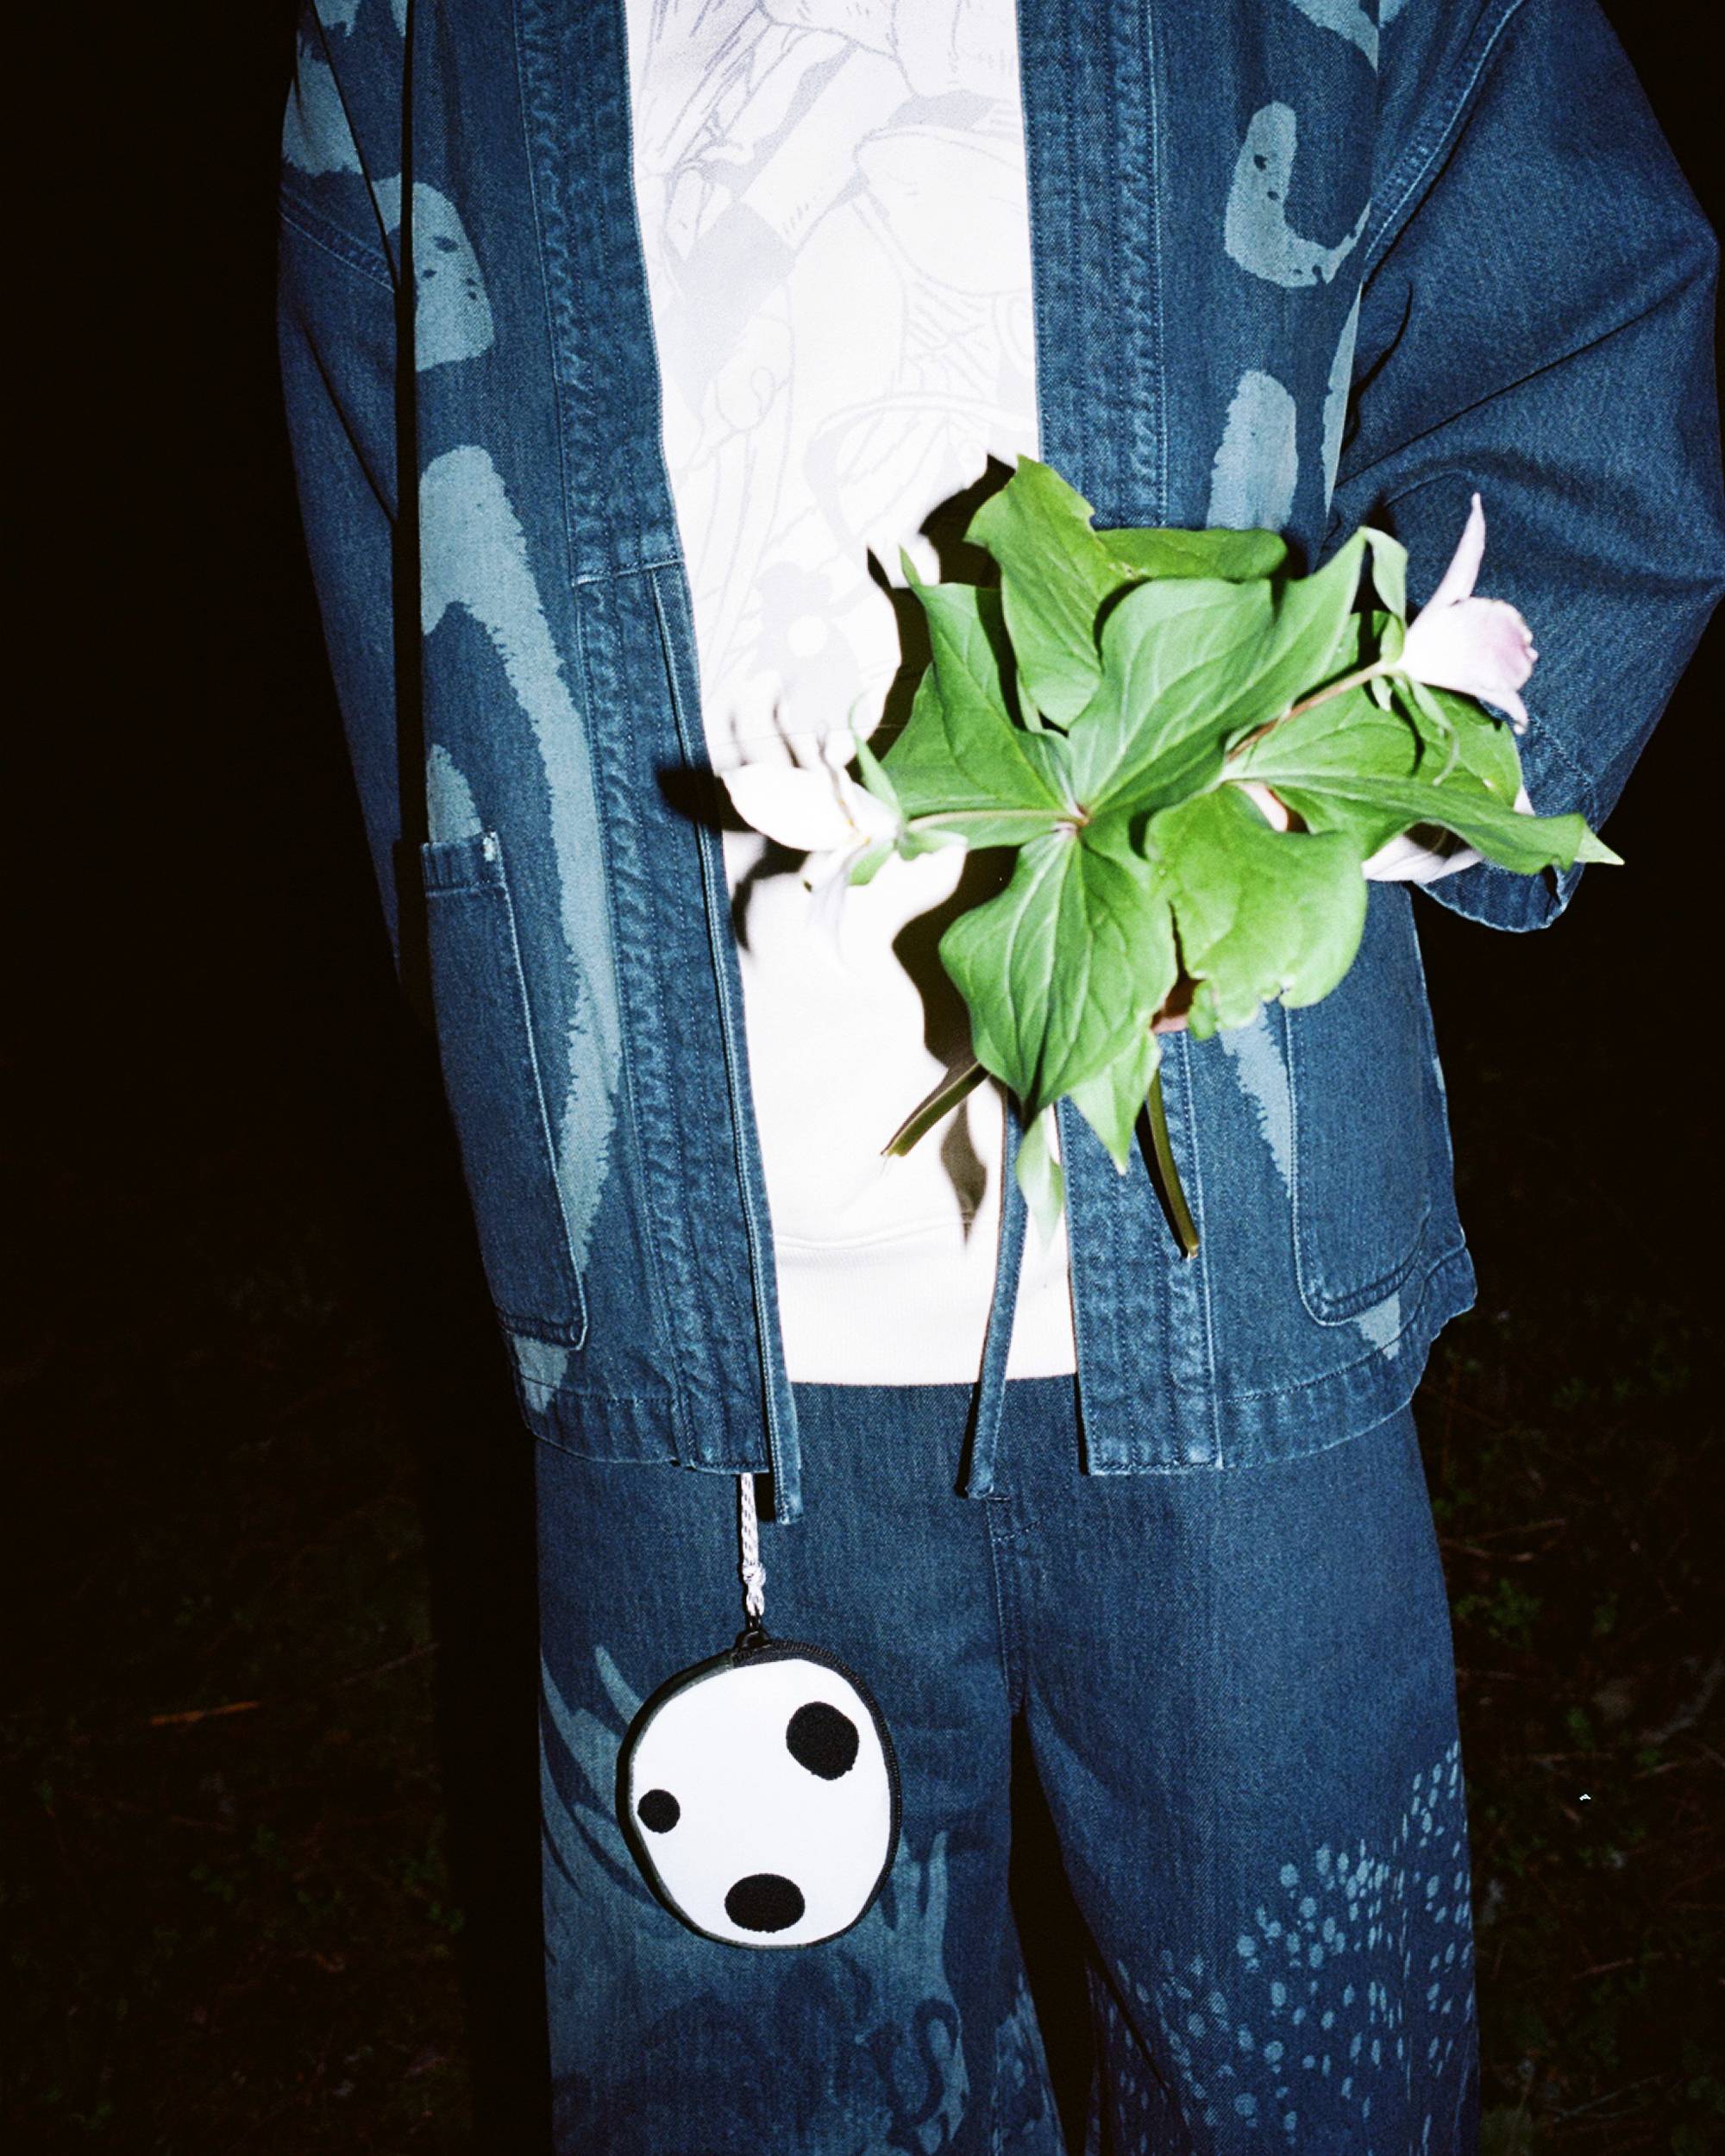 Image of person wearing Levi's® x Princess Mononoke collection pieces and posing with flower in nighttime forest setting